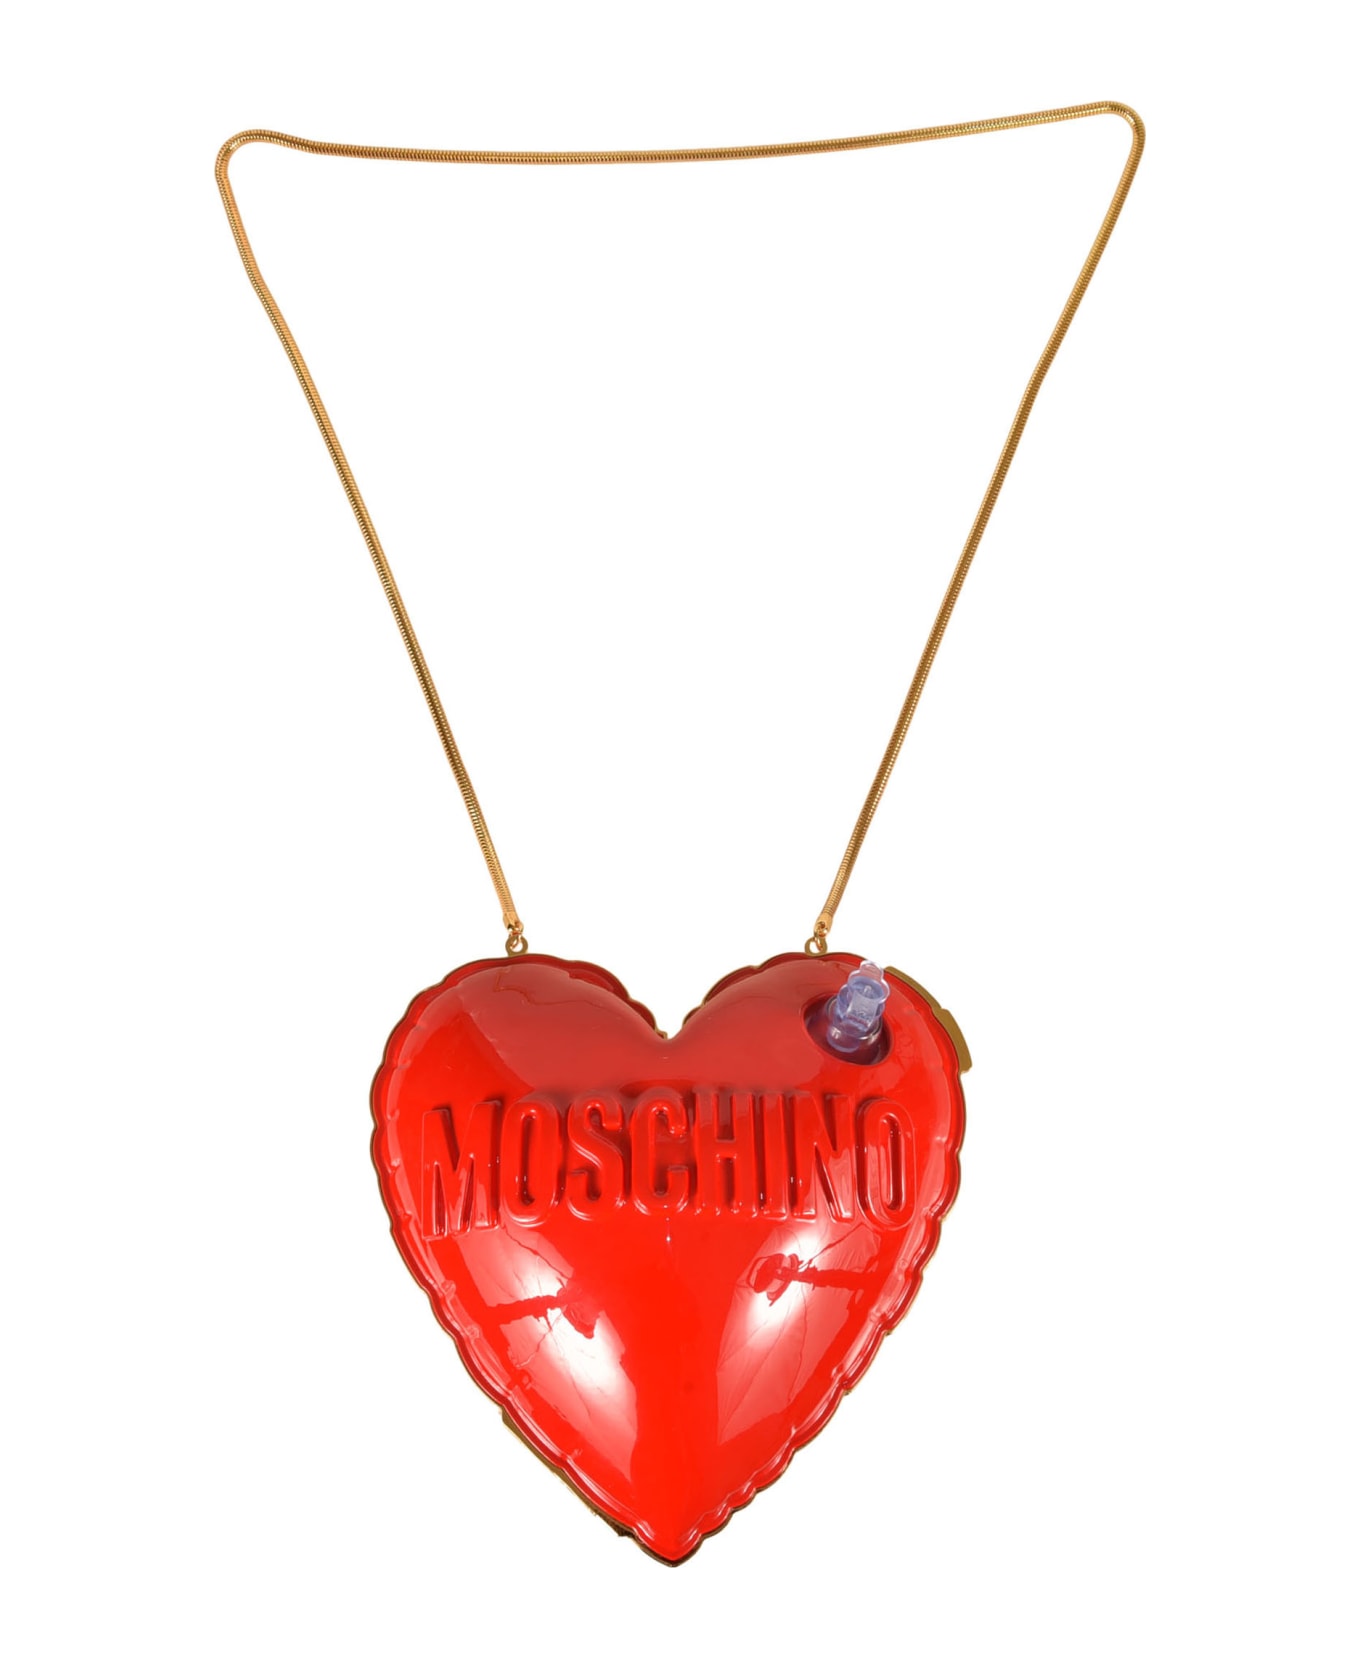 Moschino Inflatable Heart Shoulder Bag - 0112